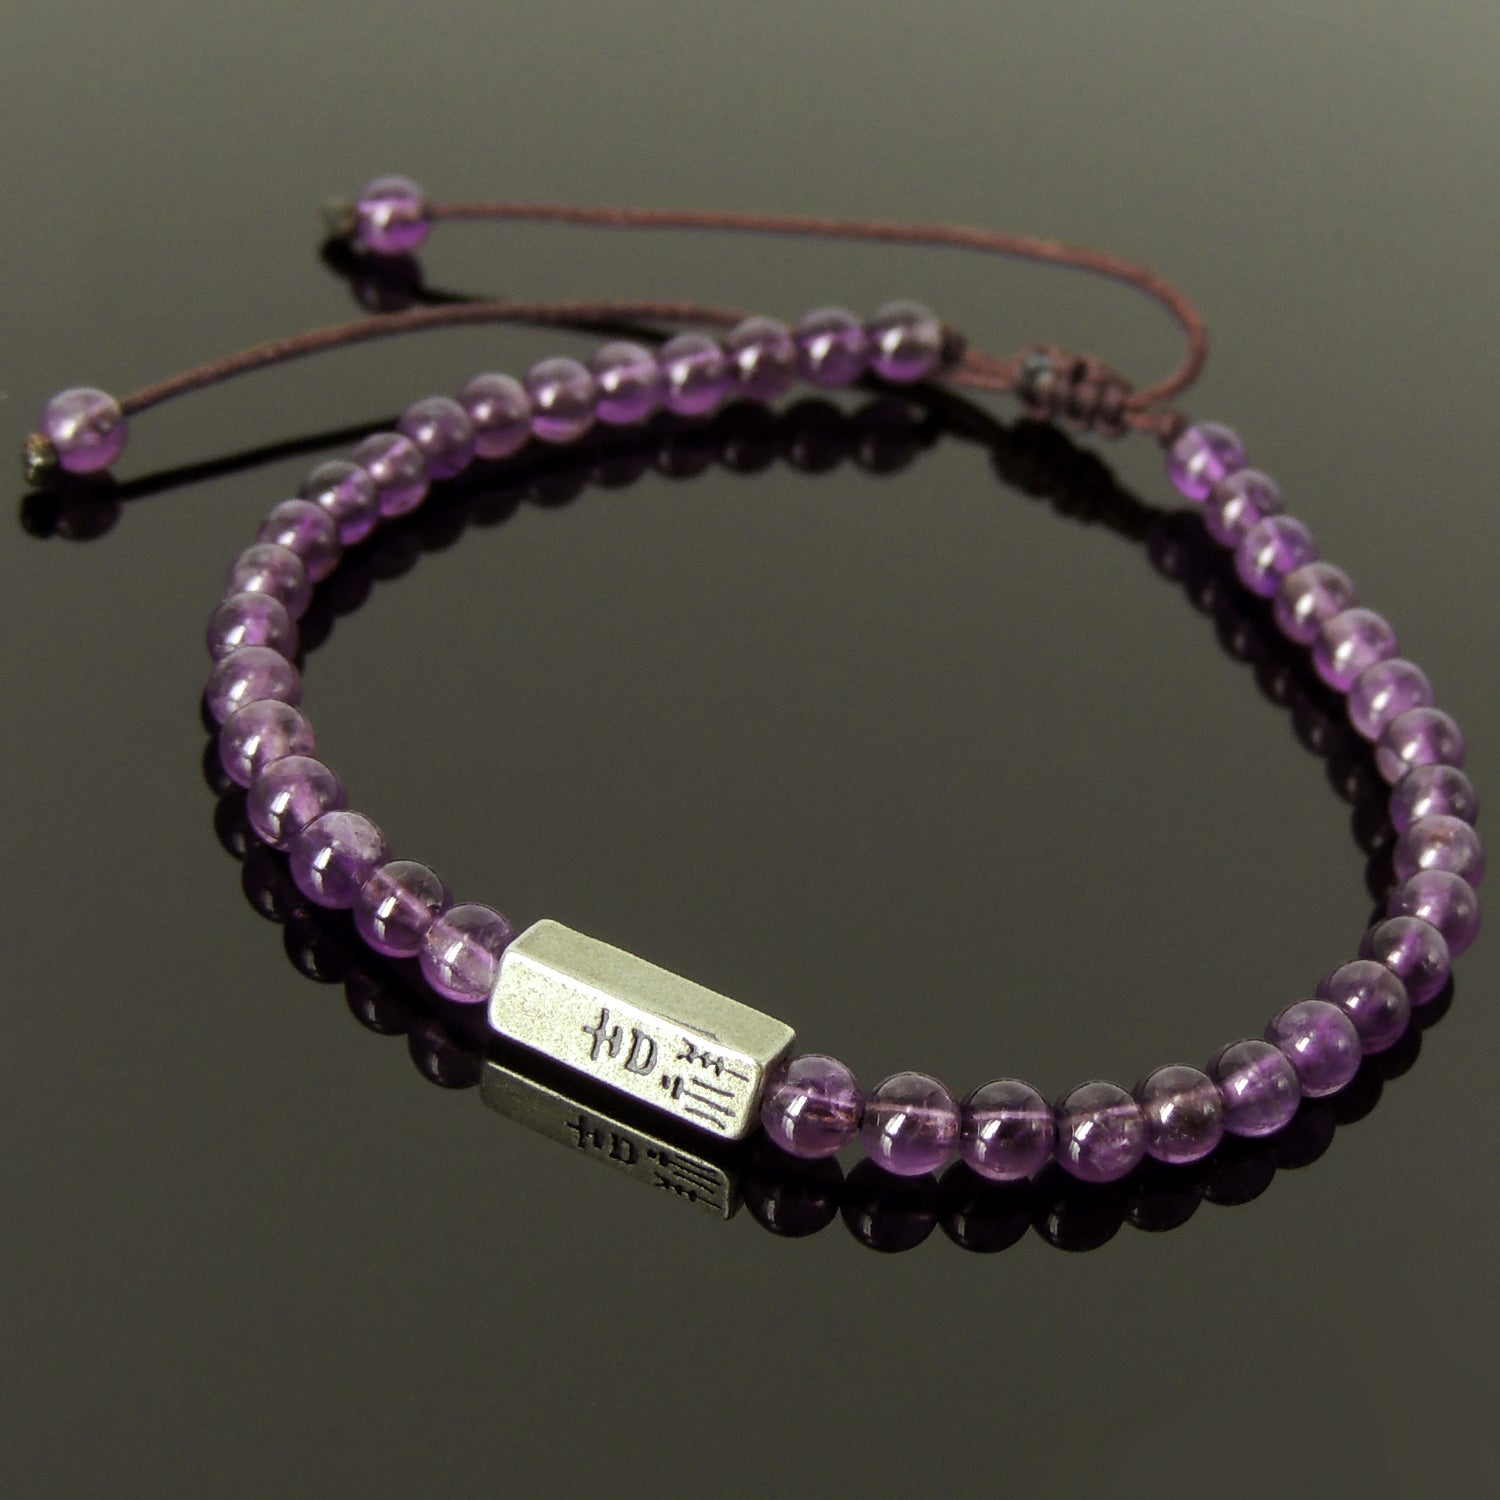 Handmade Natural Healing Amethyst Gemstones | 4mm SMALL BEADS | Double-sided Rectangular Charm with Ancient Chinese Calligraphy Characters | 吉祥如意 "May all your wishes come true!"